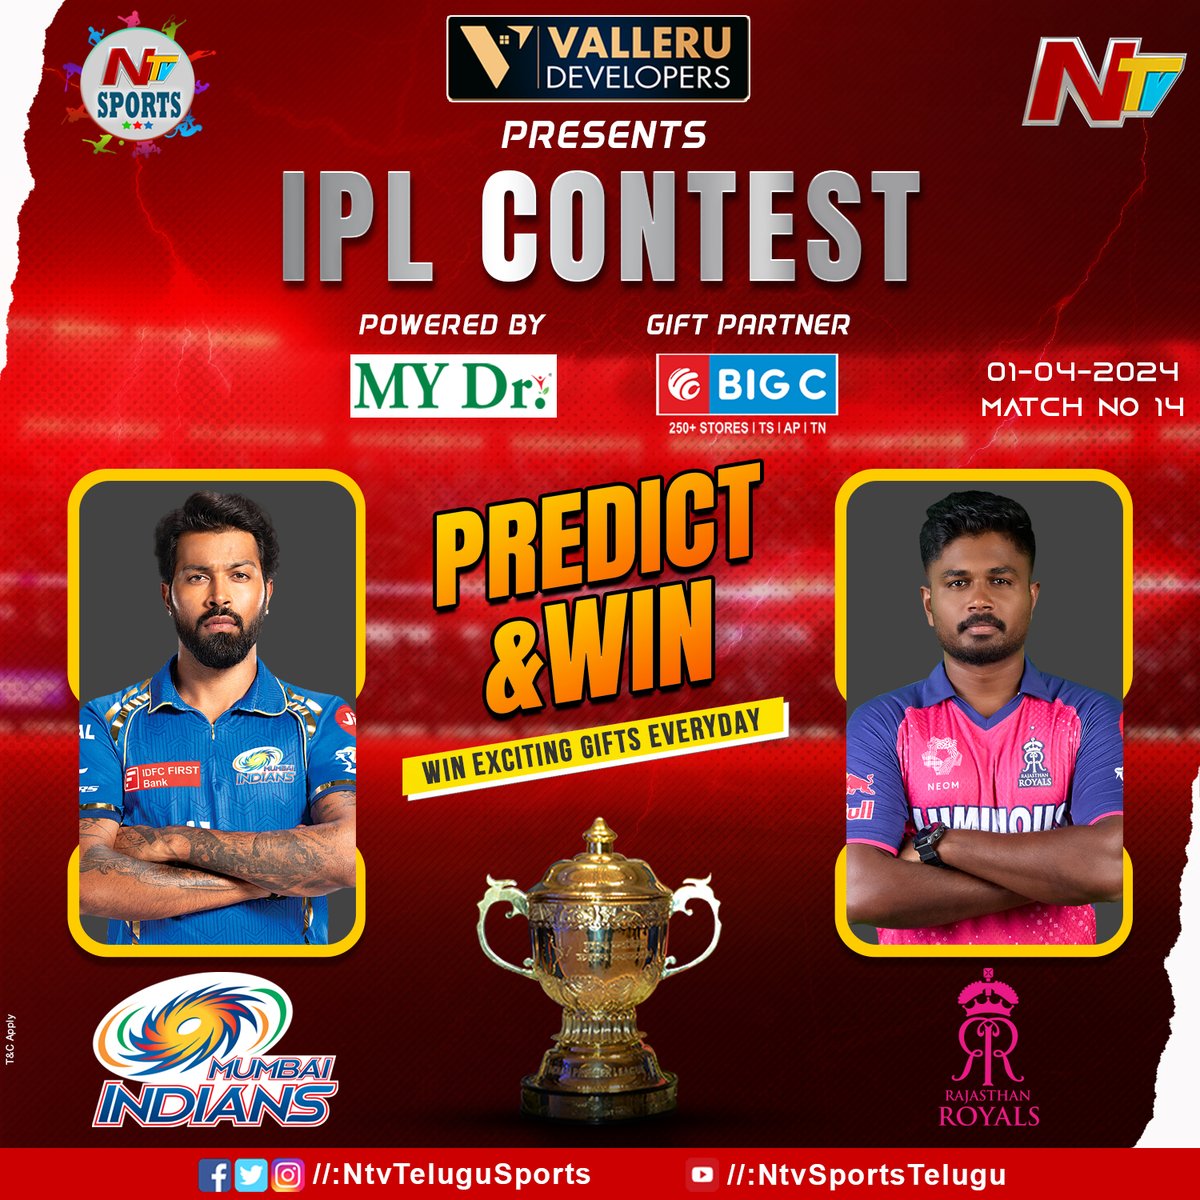 Match No-14 : #MIvRR Steps to participate in this contest: Predict the Winning #IPL Team in the comment section before the match starts. Retweet the post & mention #NTVSports & @BigCMobilesIND Winner will be picked & given surprise gifts #IPL2024 #MI #RR #NTVTelugu